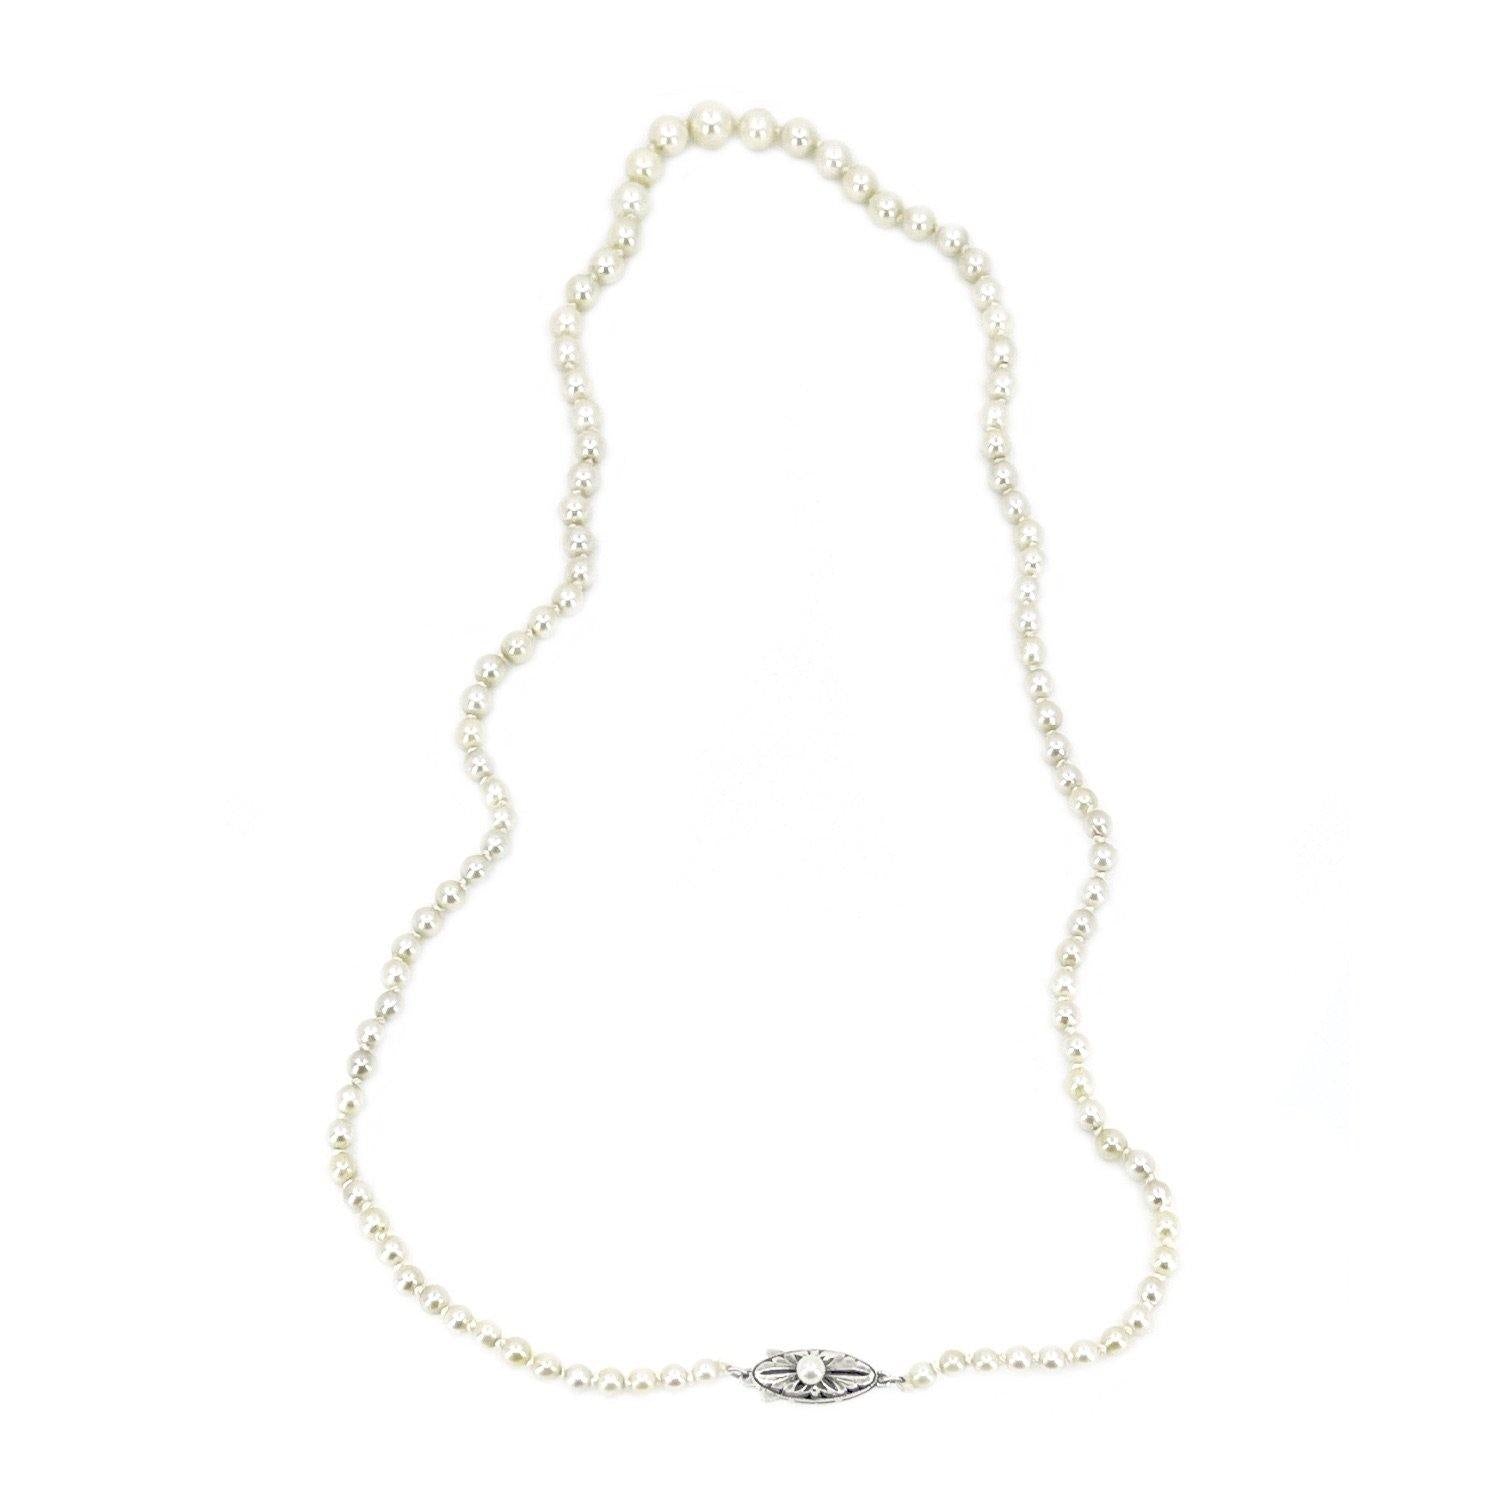 Deco Milgrain Engraved Japanese Saltwater Cultured Akoya Pearl Graduated Necklace - Sterling Silver 20.50 Inch